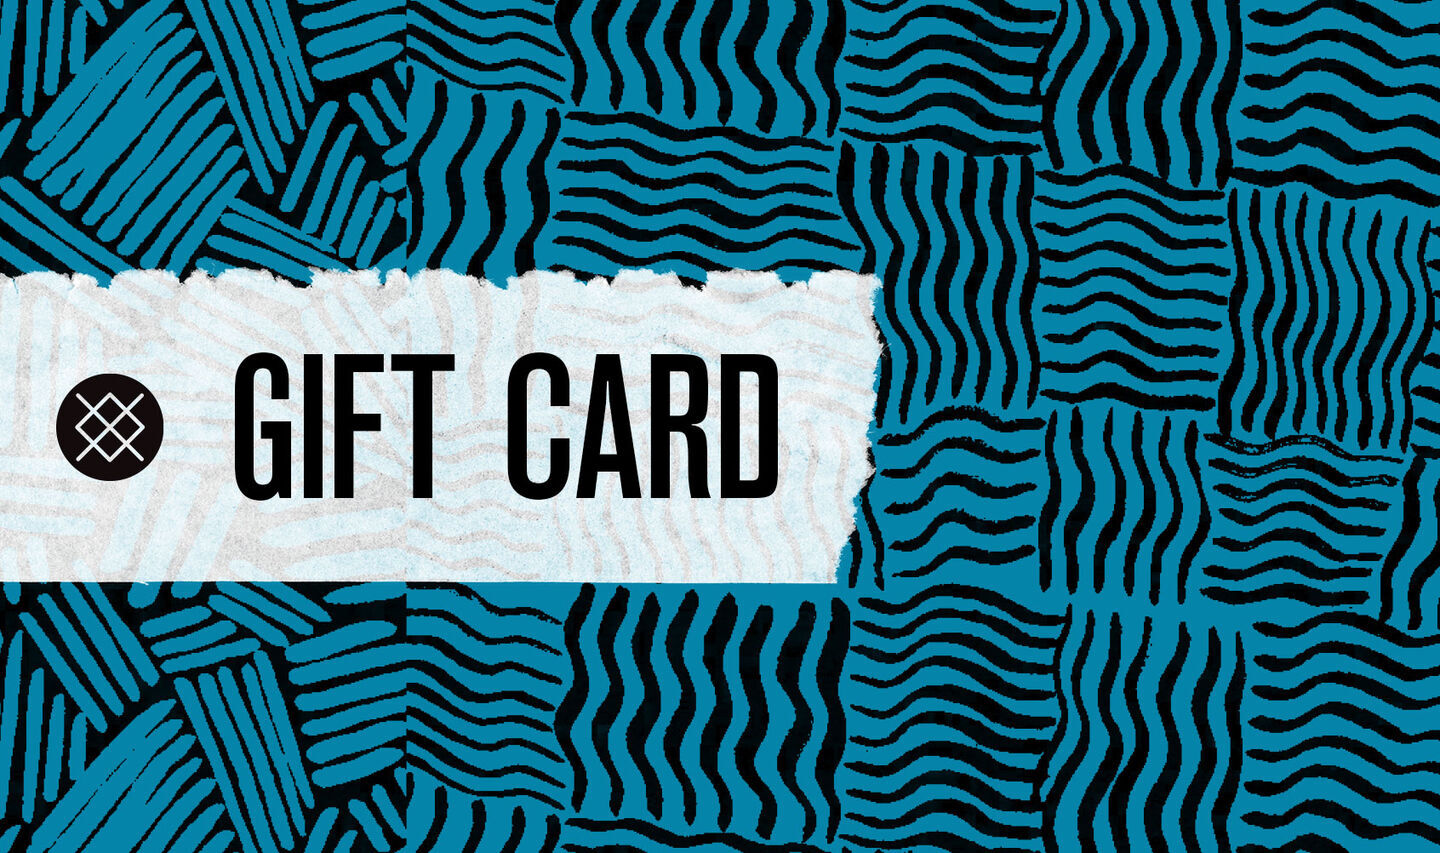 Blue and black pattern with text overlay that reads "Gift card"